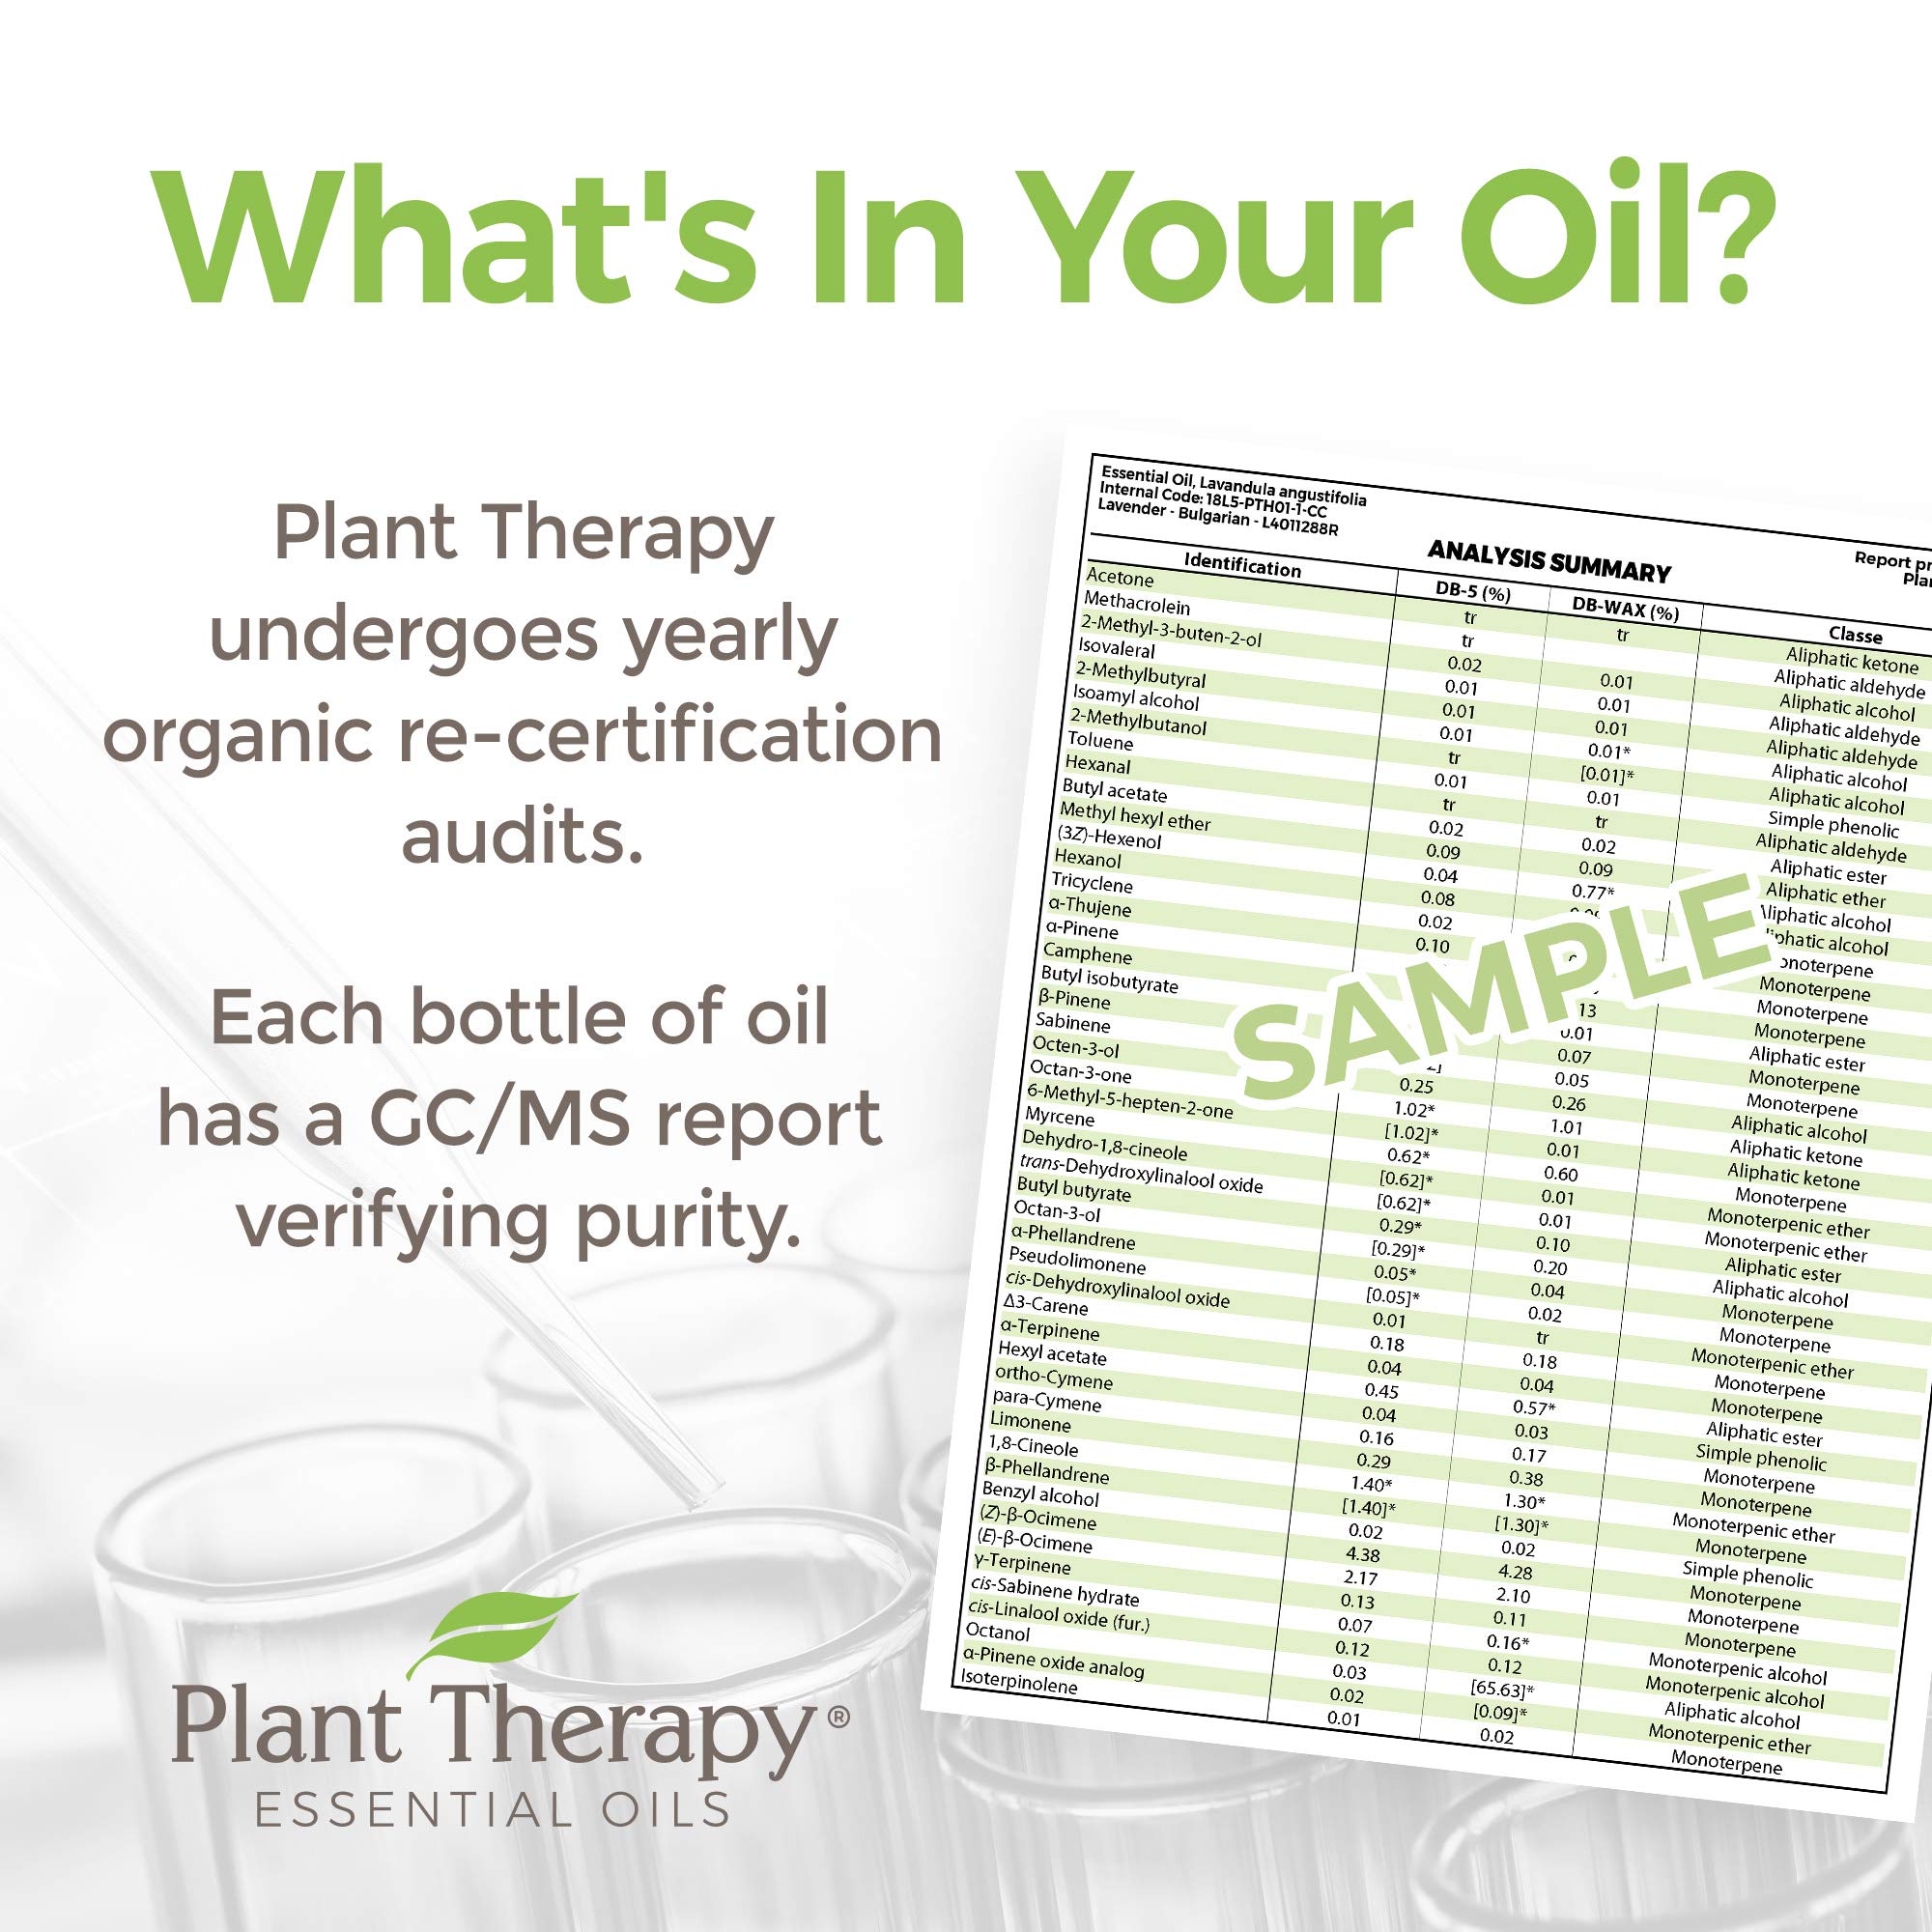 Plant Therapy Organic Relax Essential Oil Blend 100% Pure, Undiluted, Natural Aromatherapy, Therapeutic Grade 10 mL (1/3 oz)